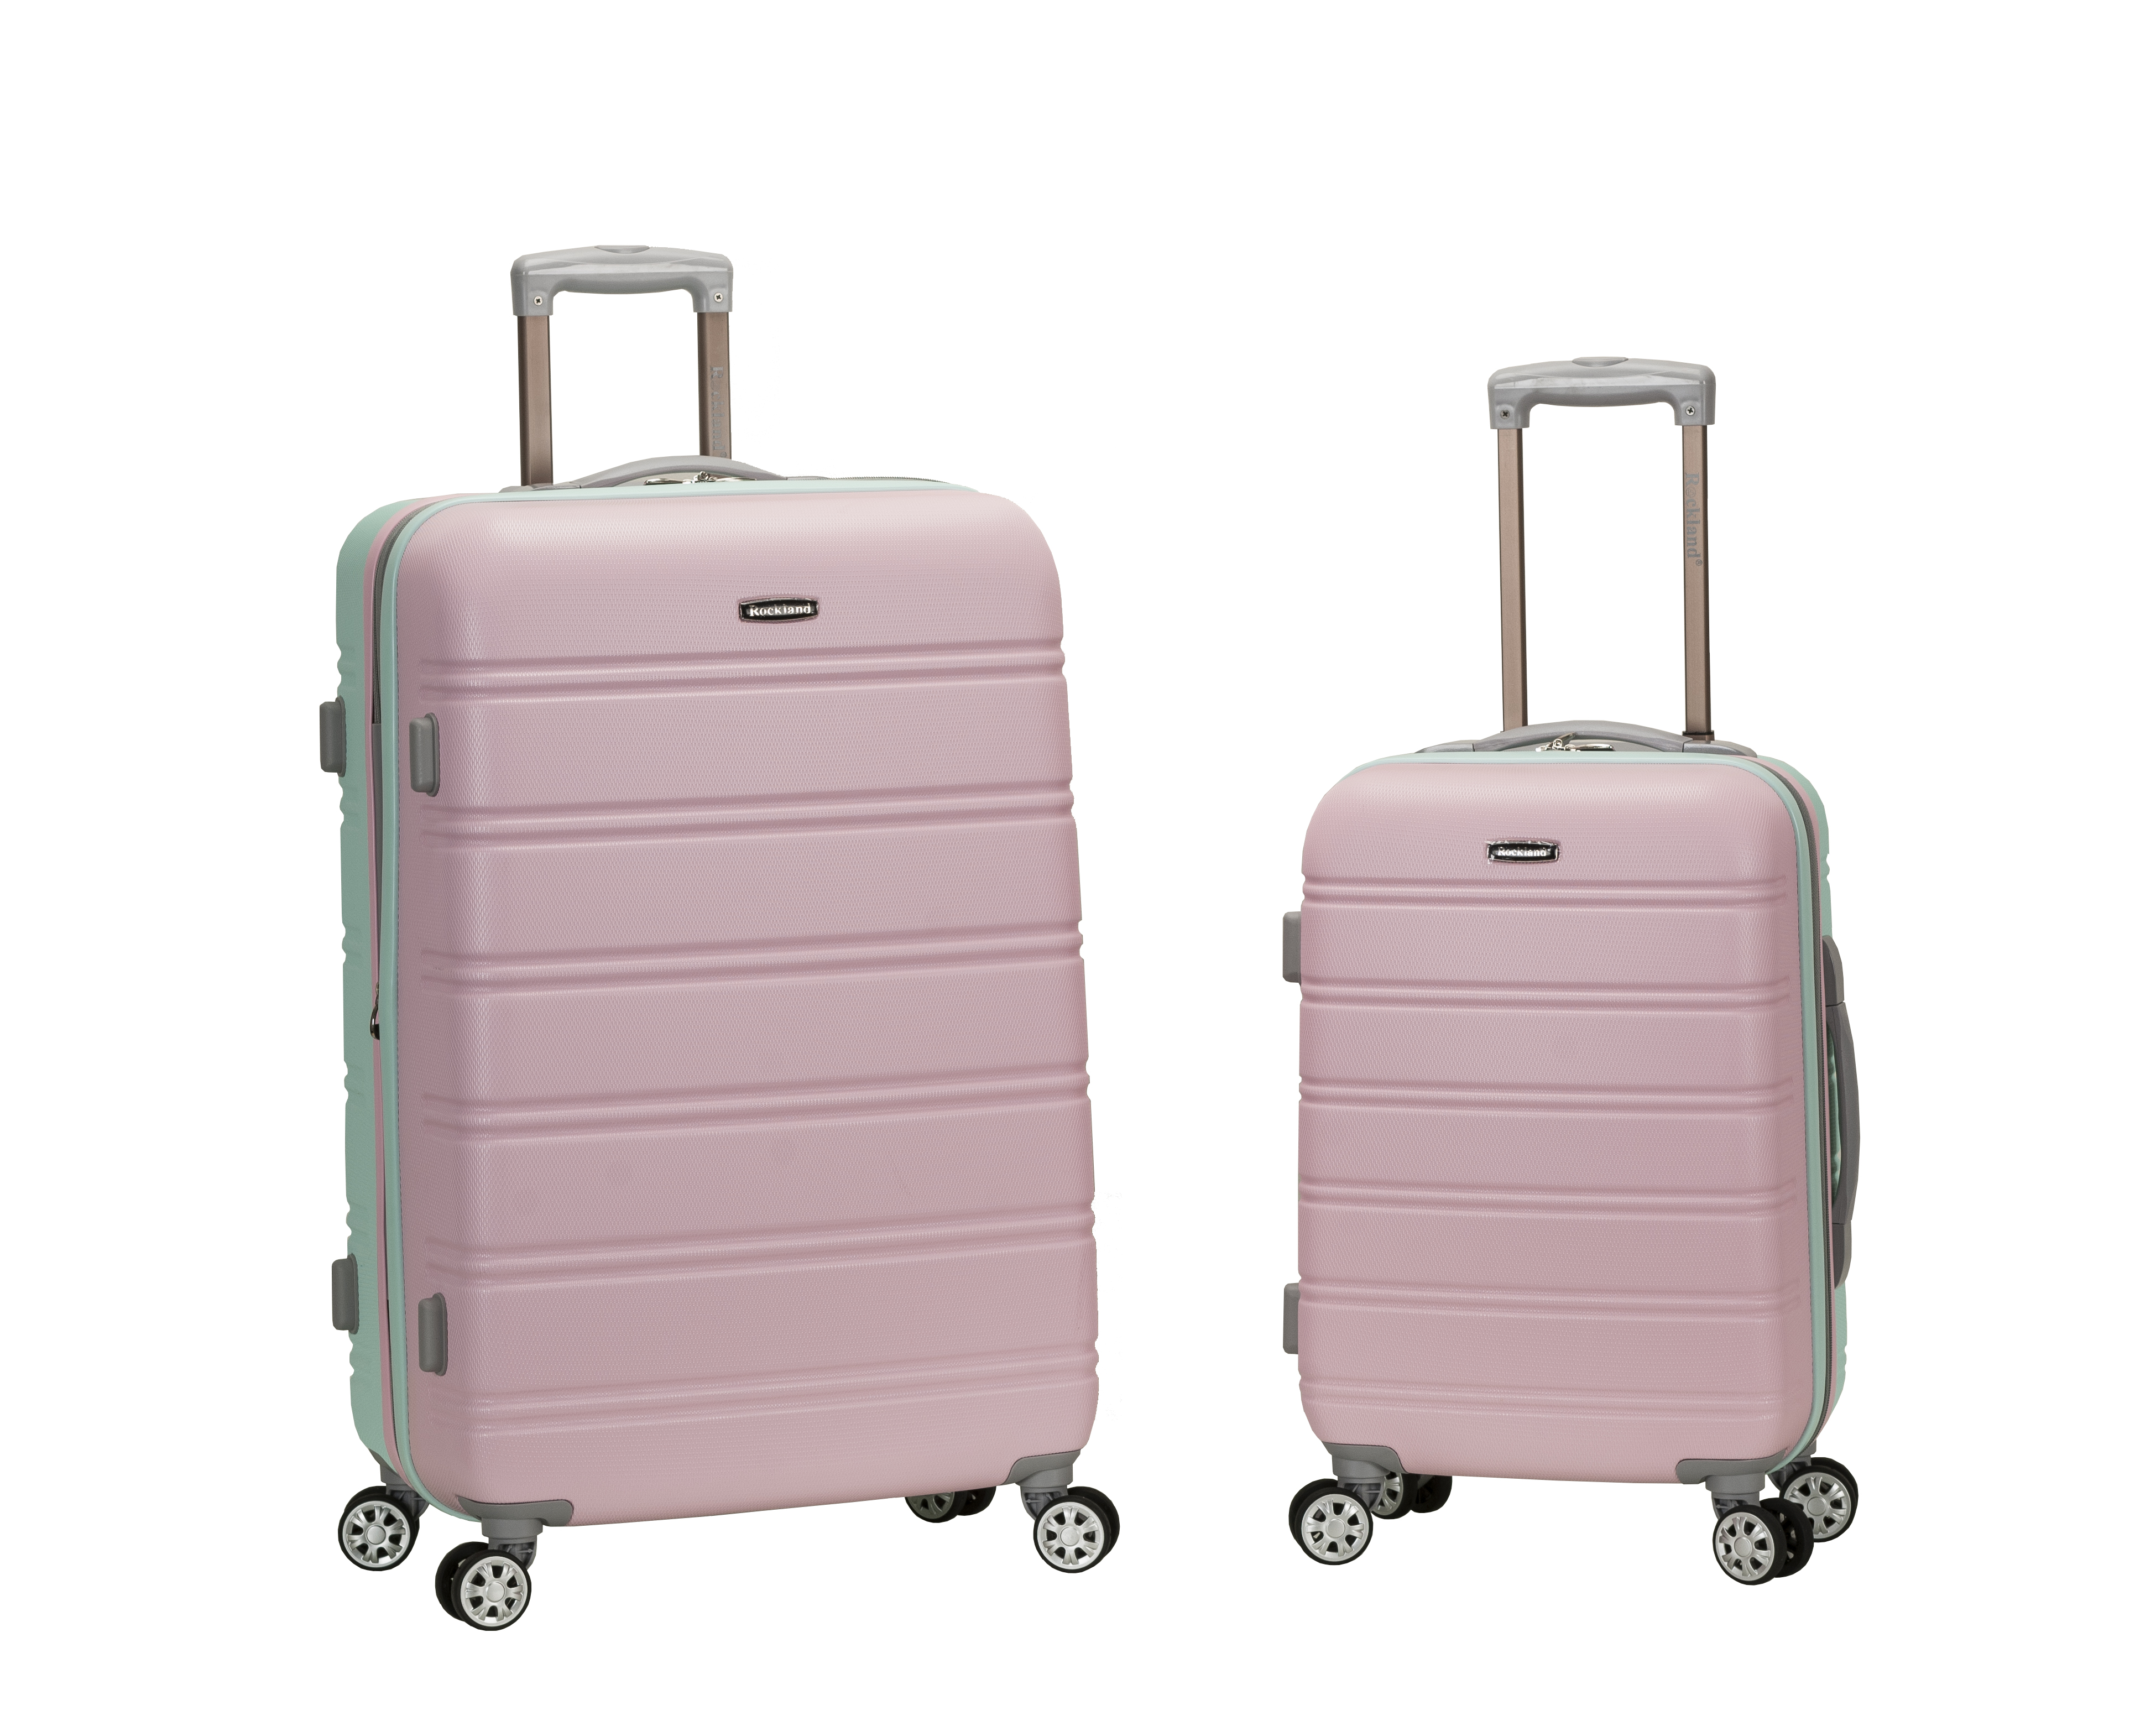 Foxluggage F225-mint Expandable Abs Spinner Set, 2 Pieces